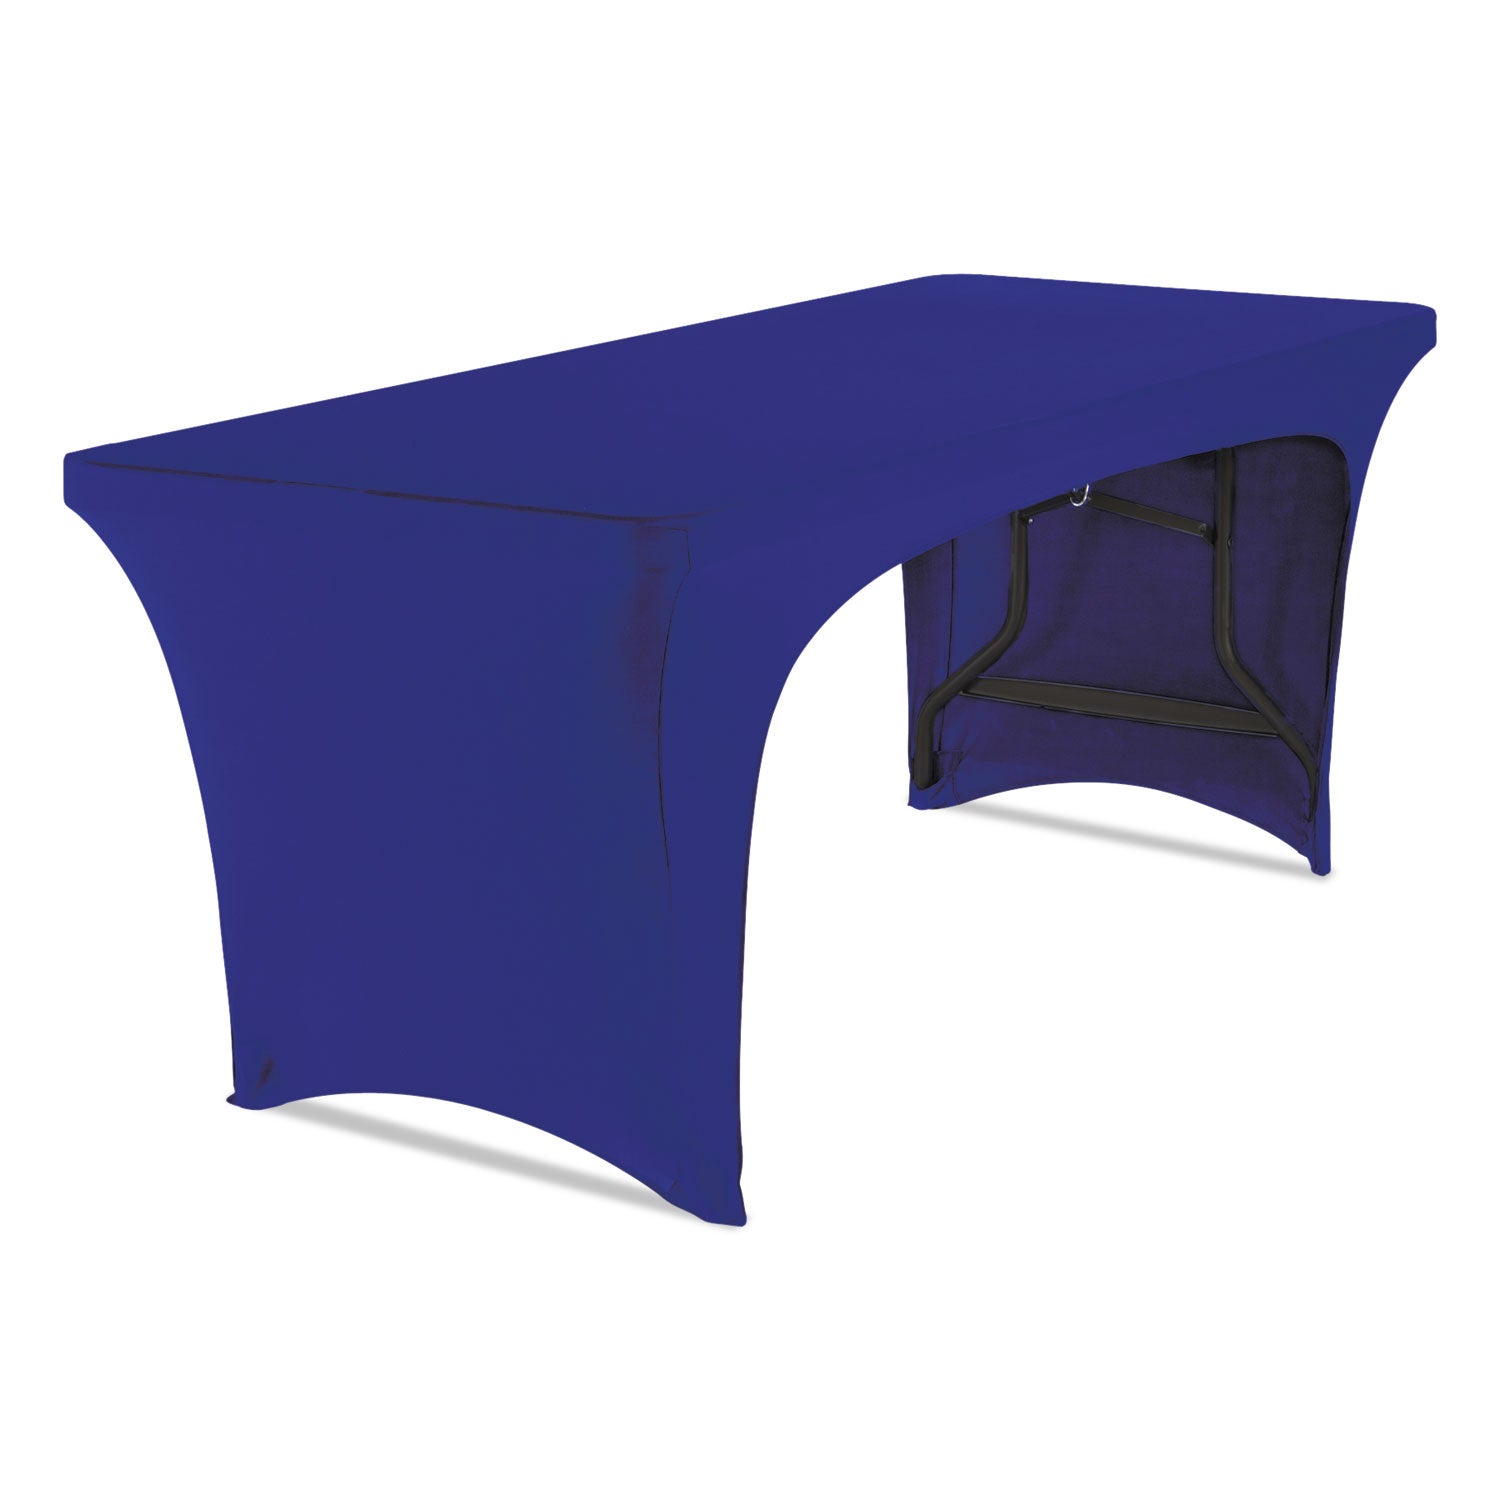 iGear Fabric Table Cover, Open Design, Polyester/Spandex, 30" x 72", Blue - 